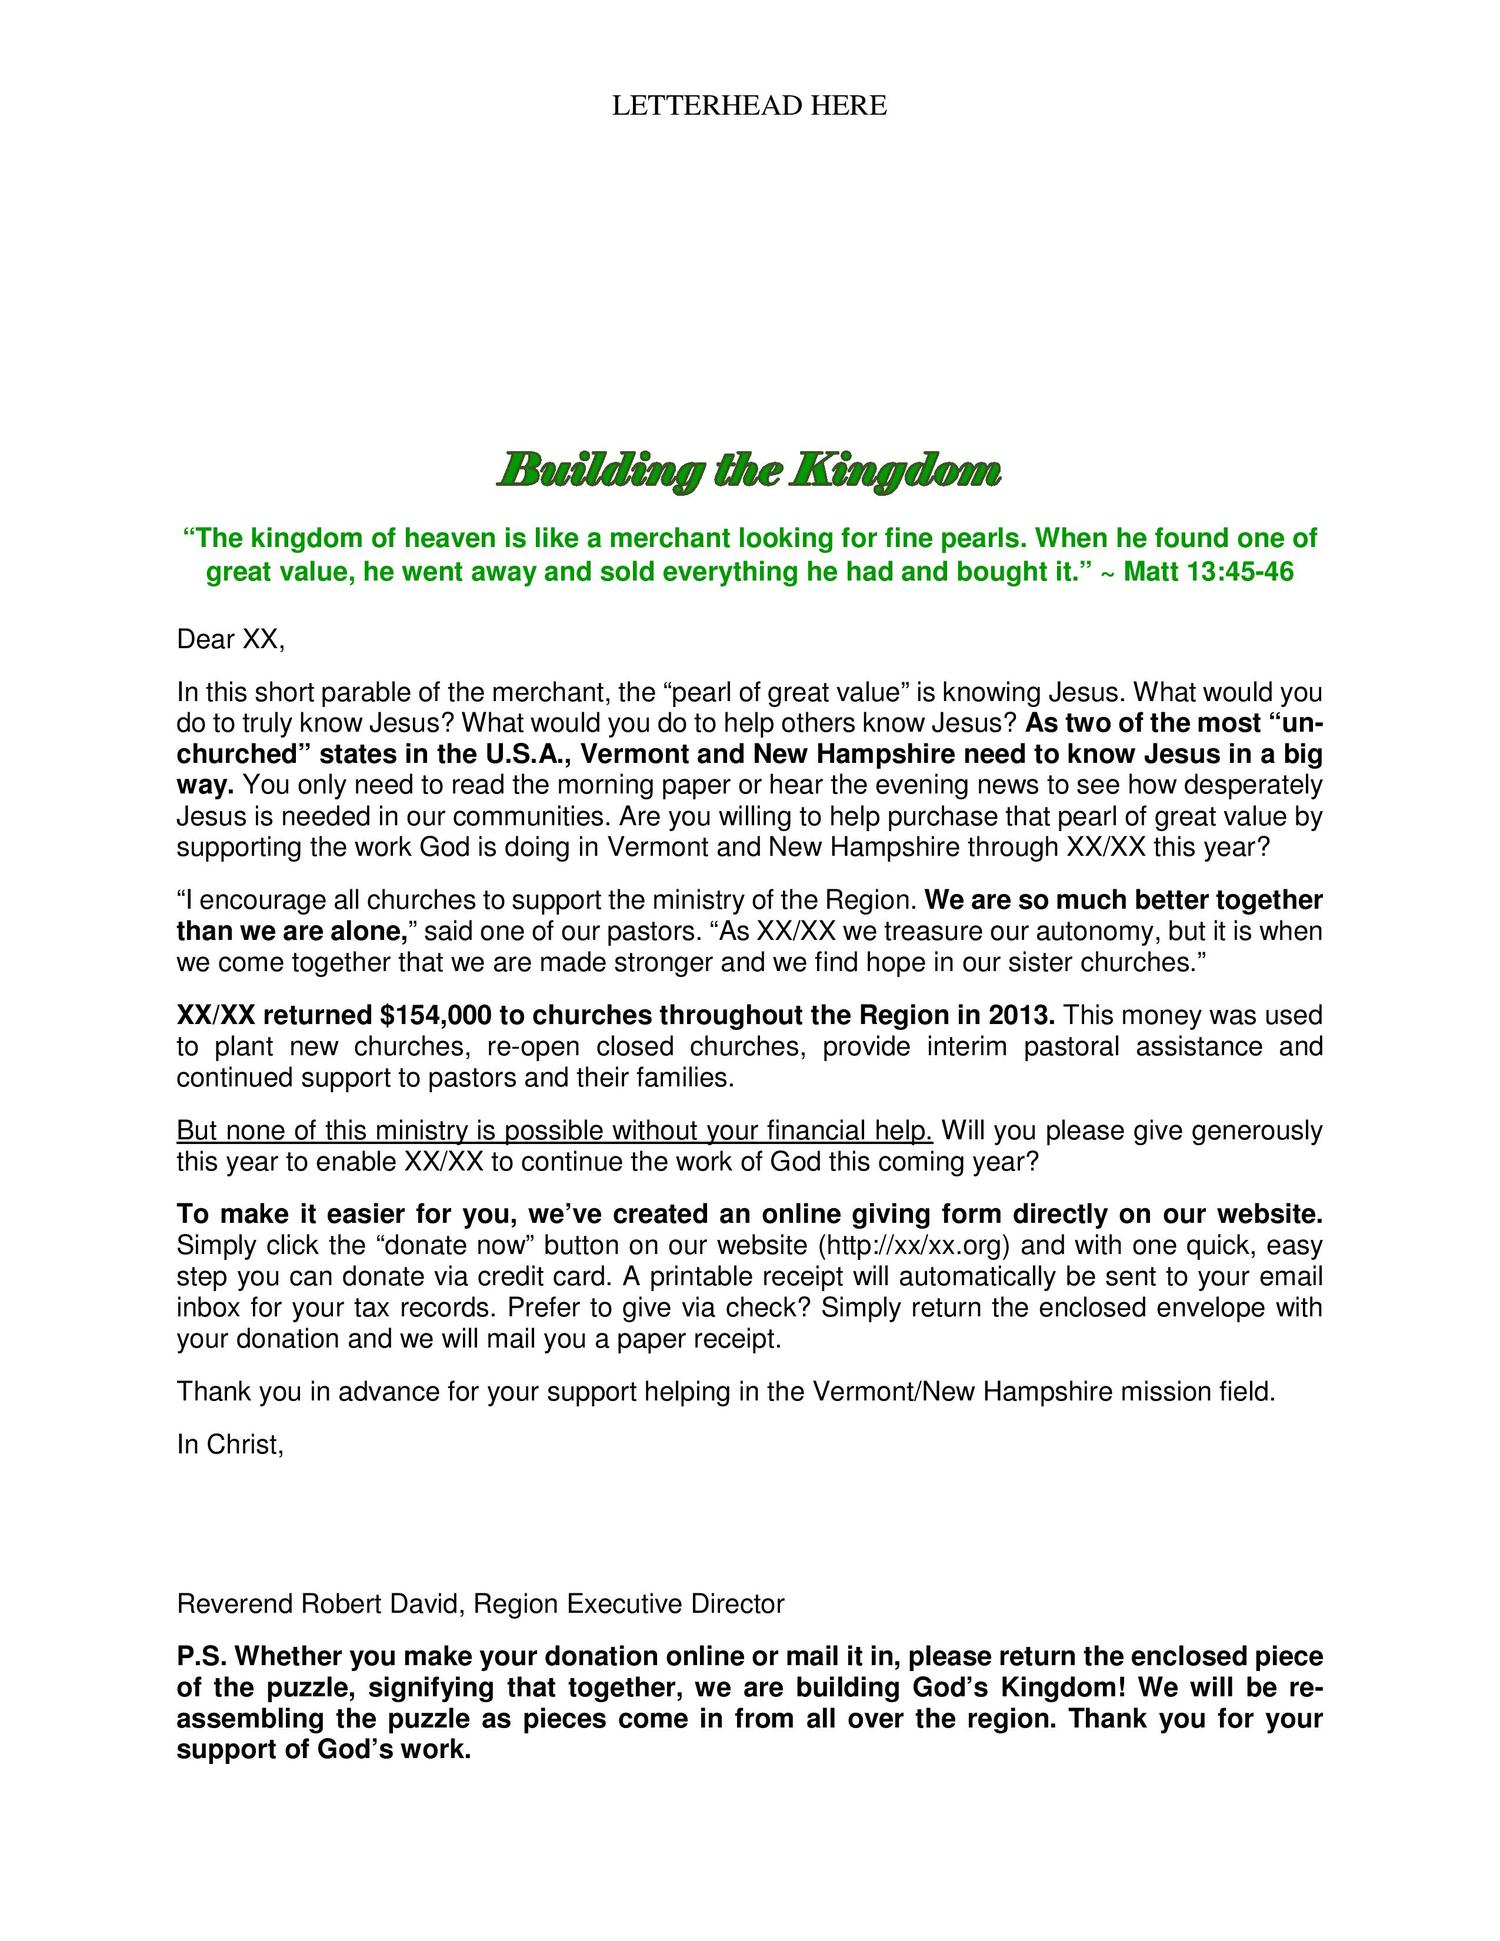 Ministry Support Letter Template - Fundraising Appeal Letters to Grab attention and Get Results by